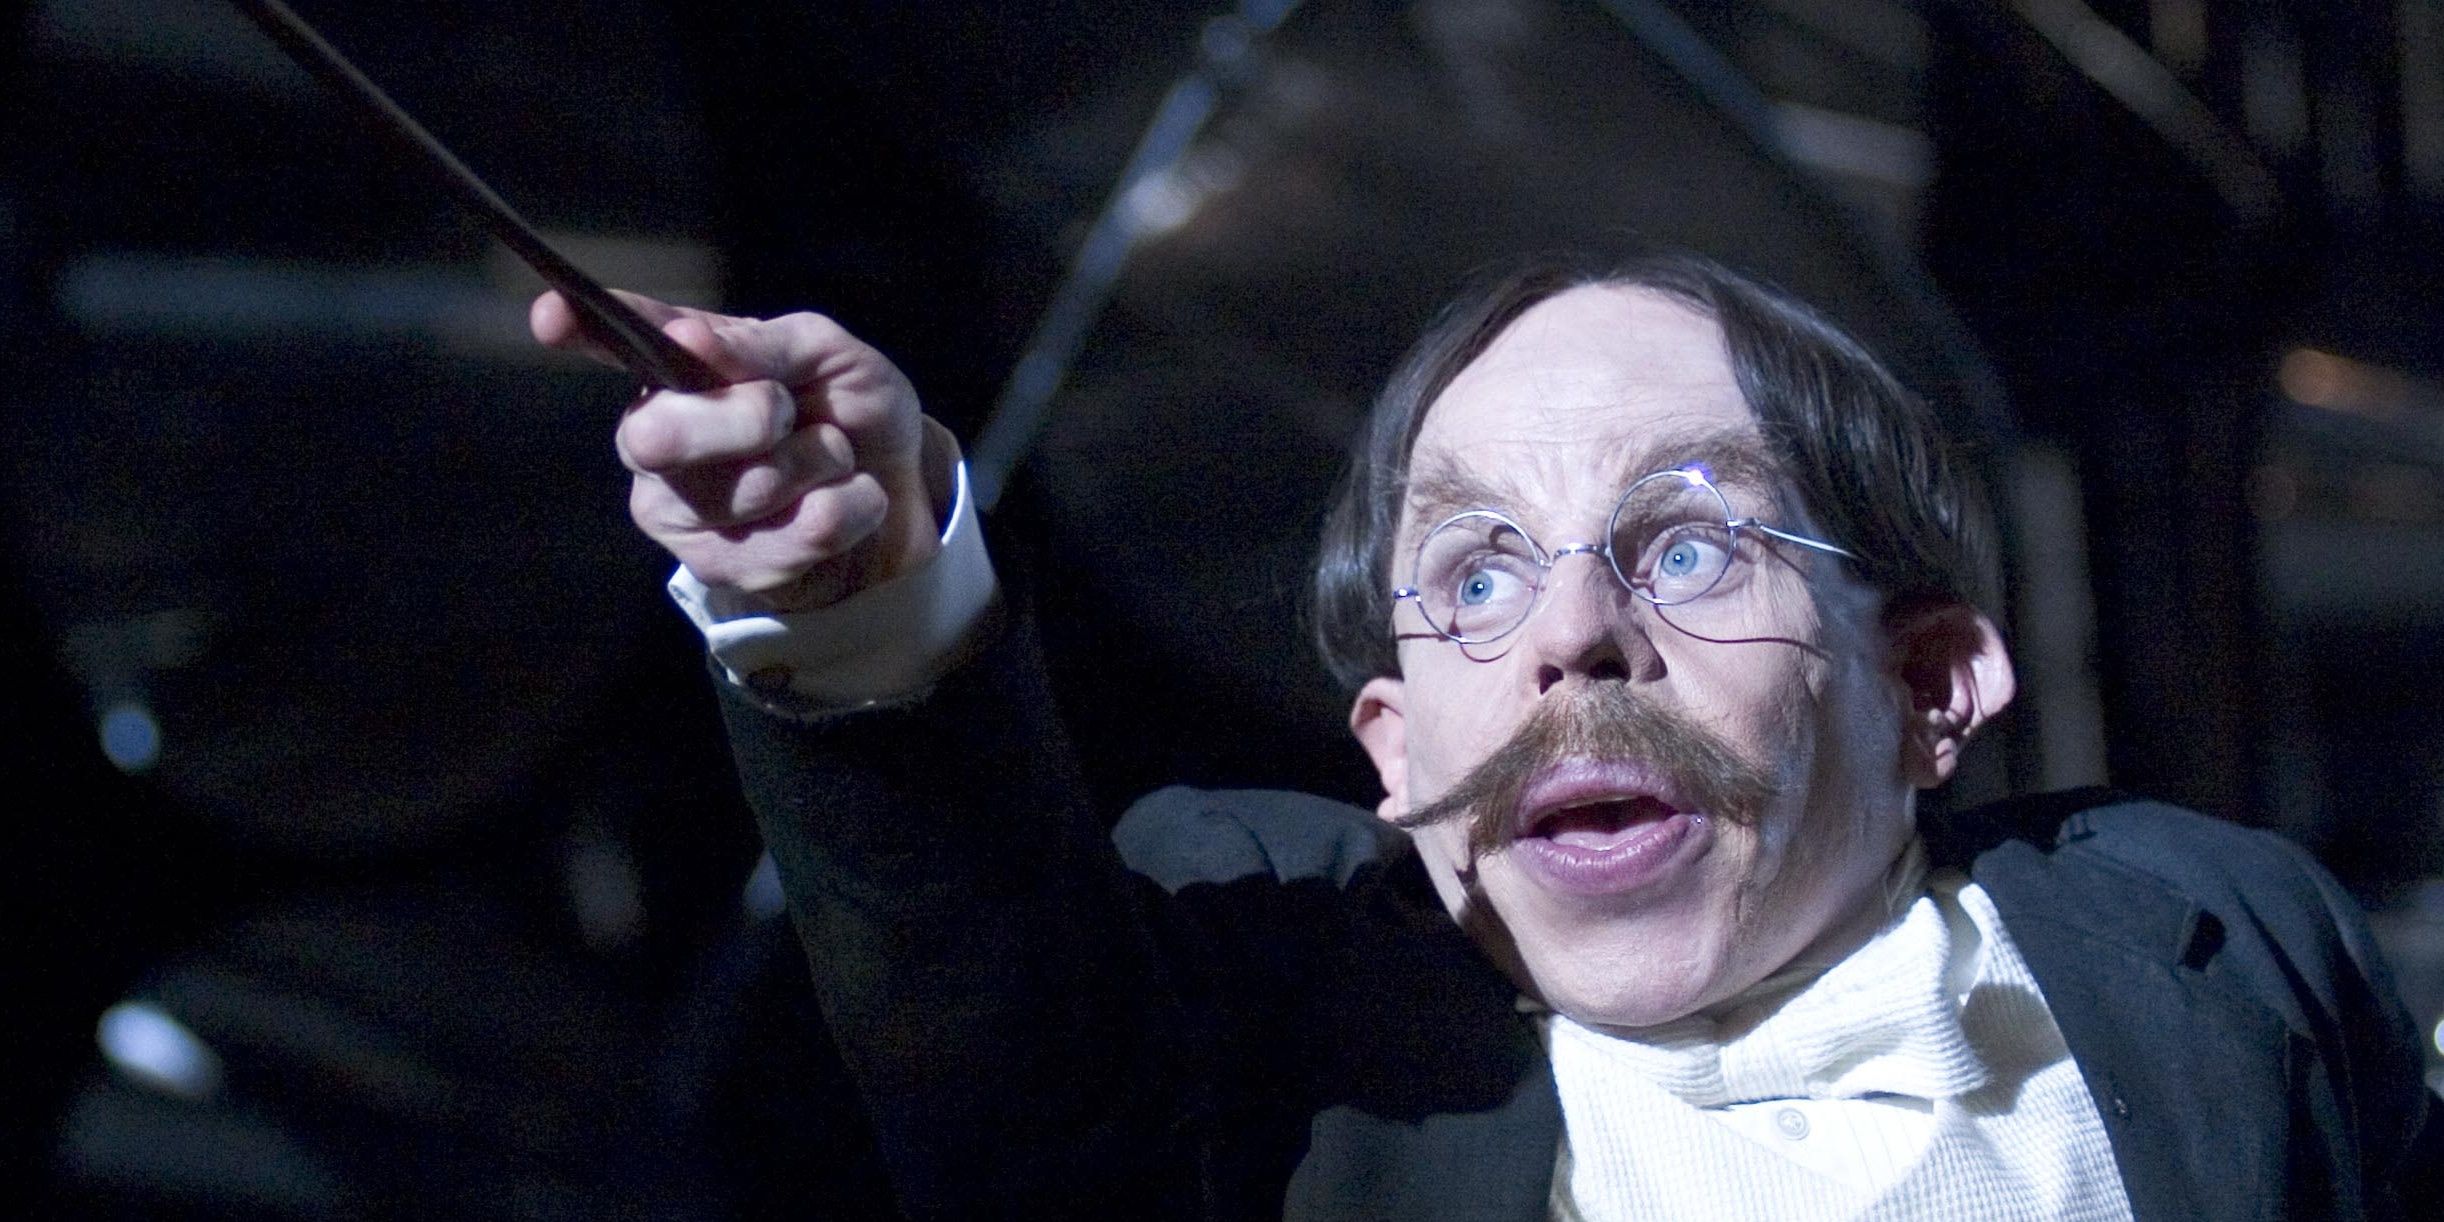 Flitwick casts a spell in Harry Potter.